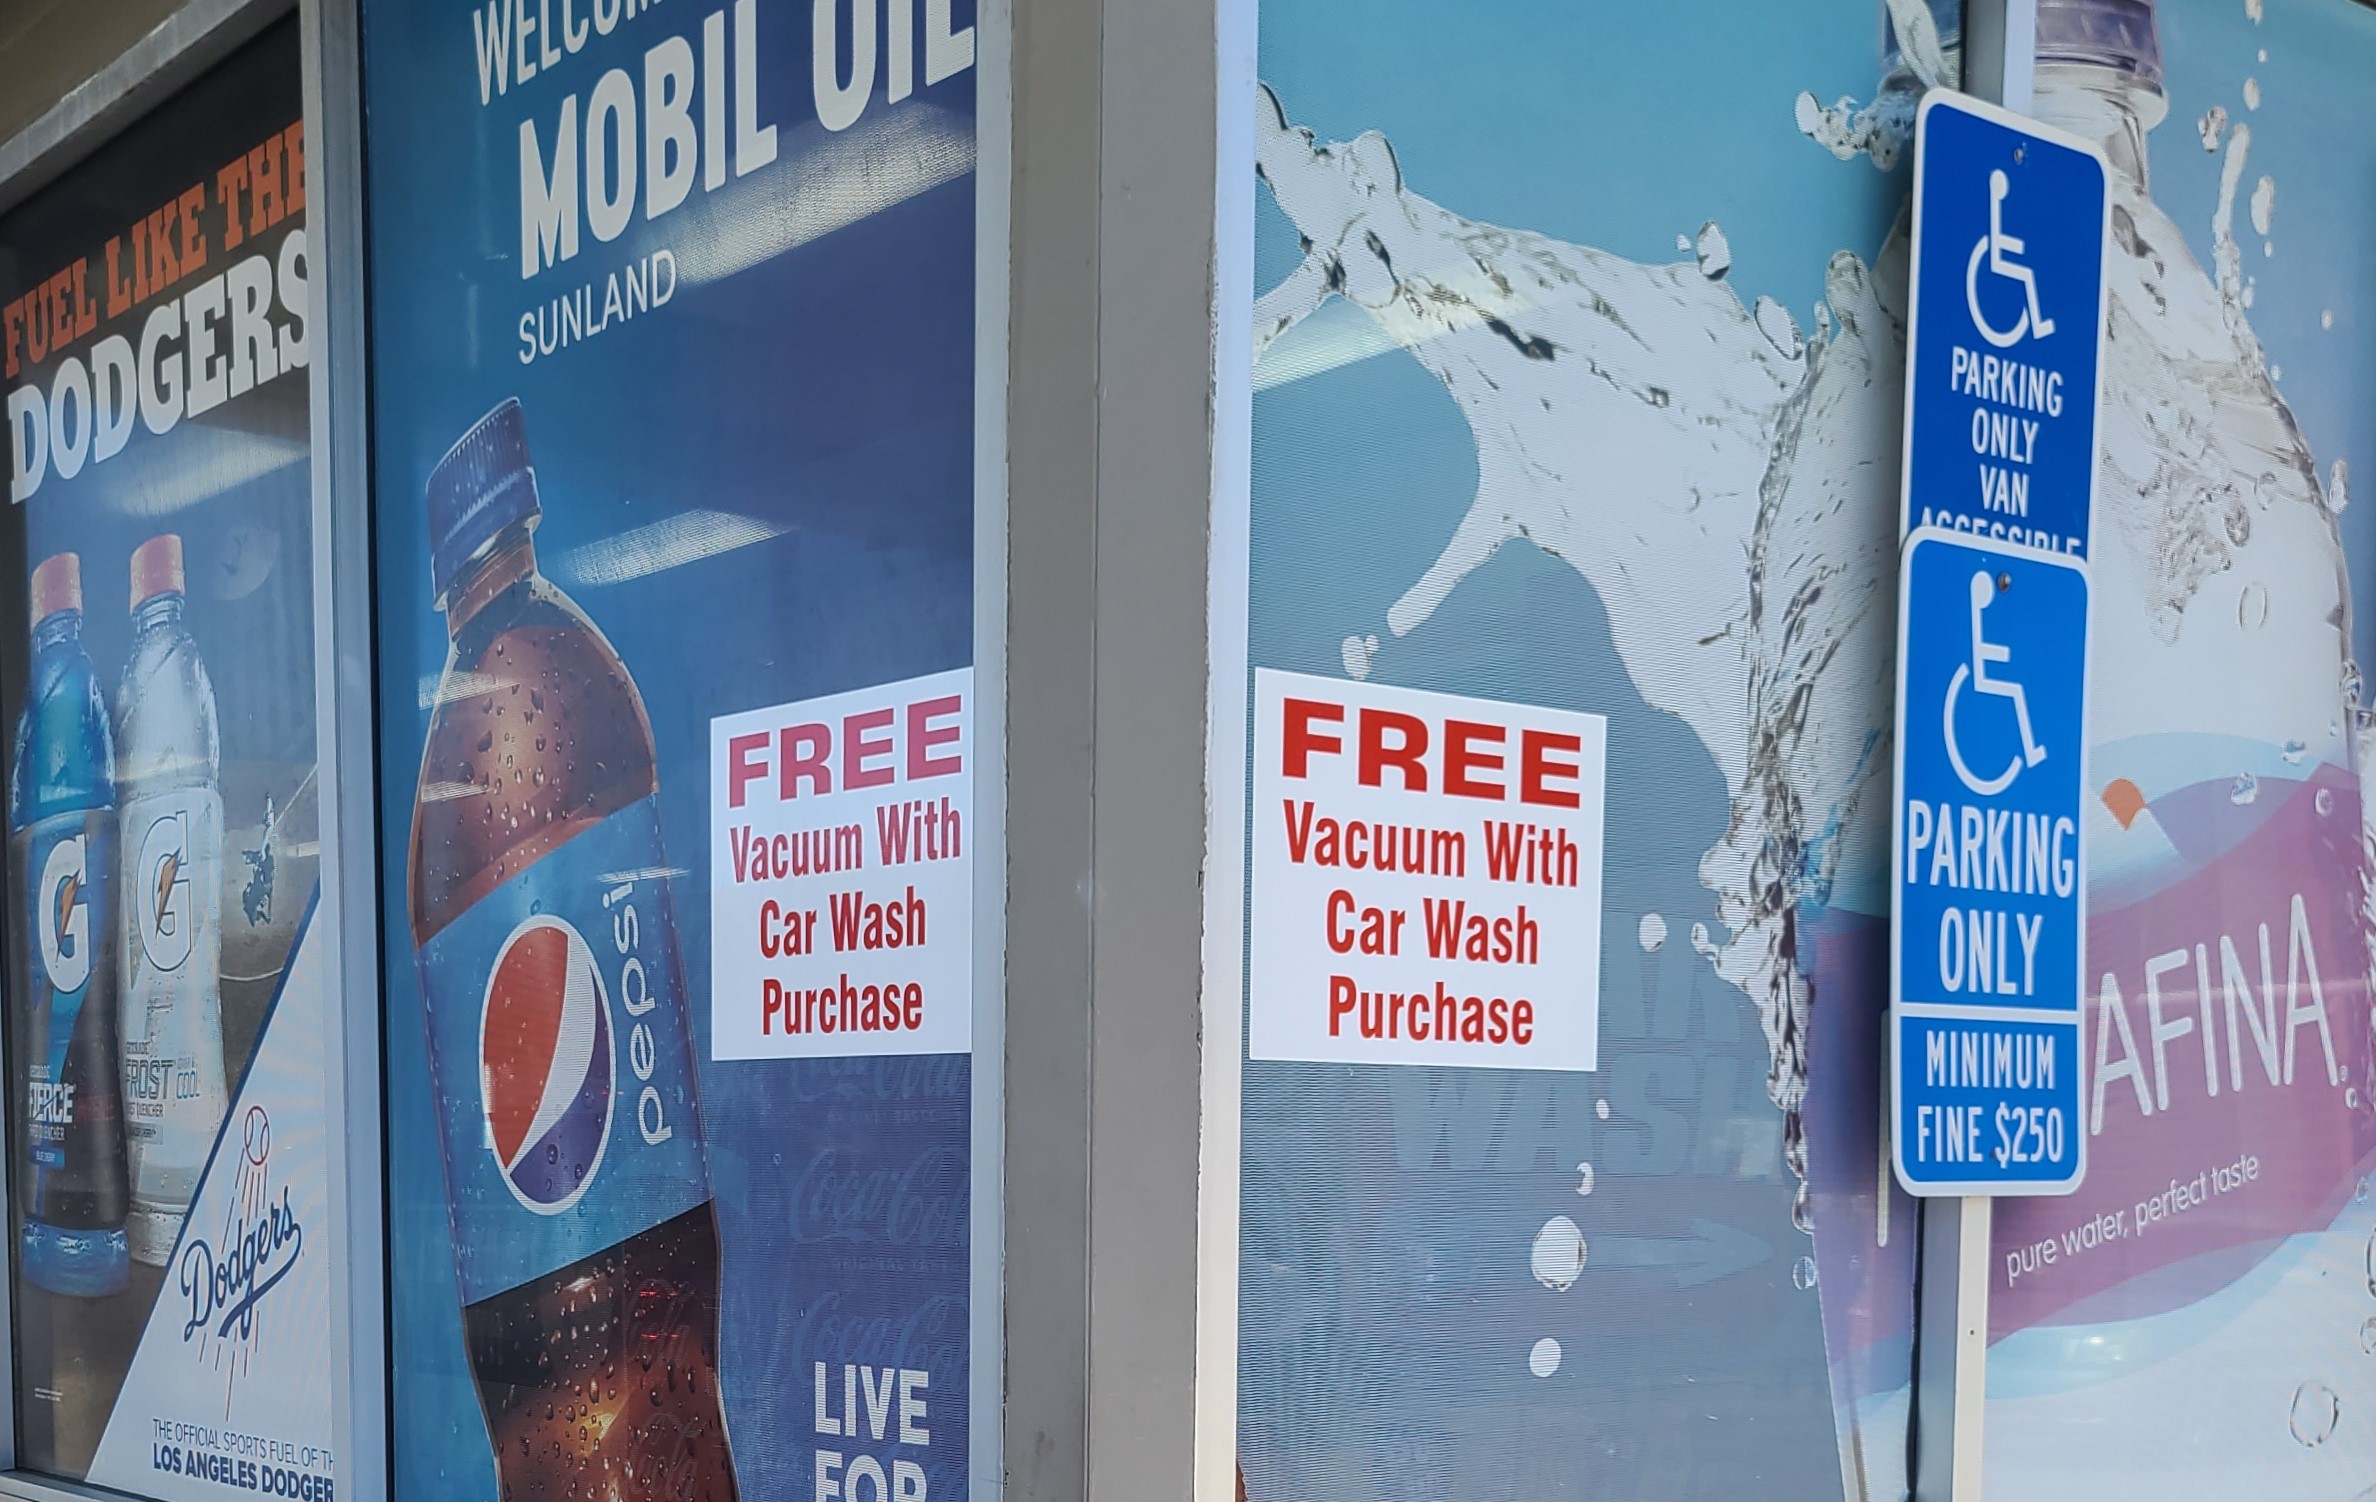 The advertisement window stickers for Mobil Express Car Wash in Sunland promotes their free vacuum service after every car wash.